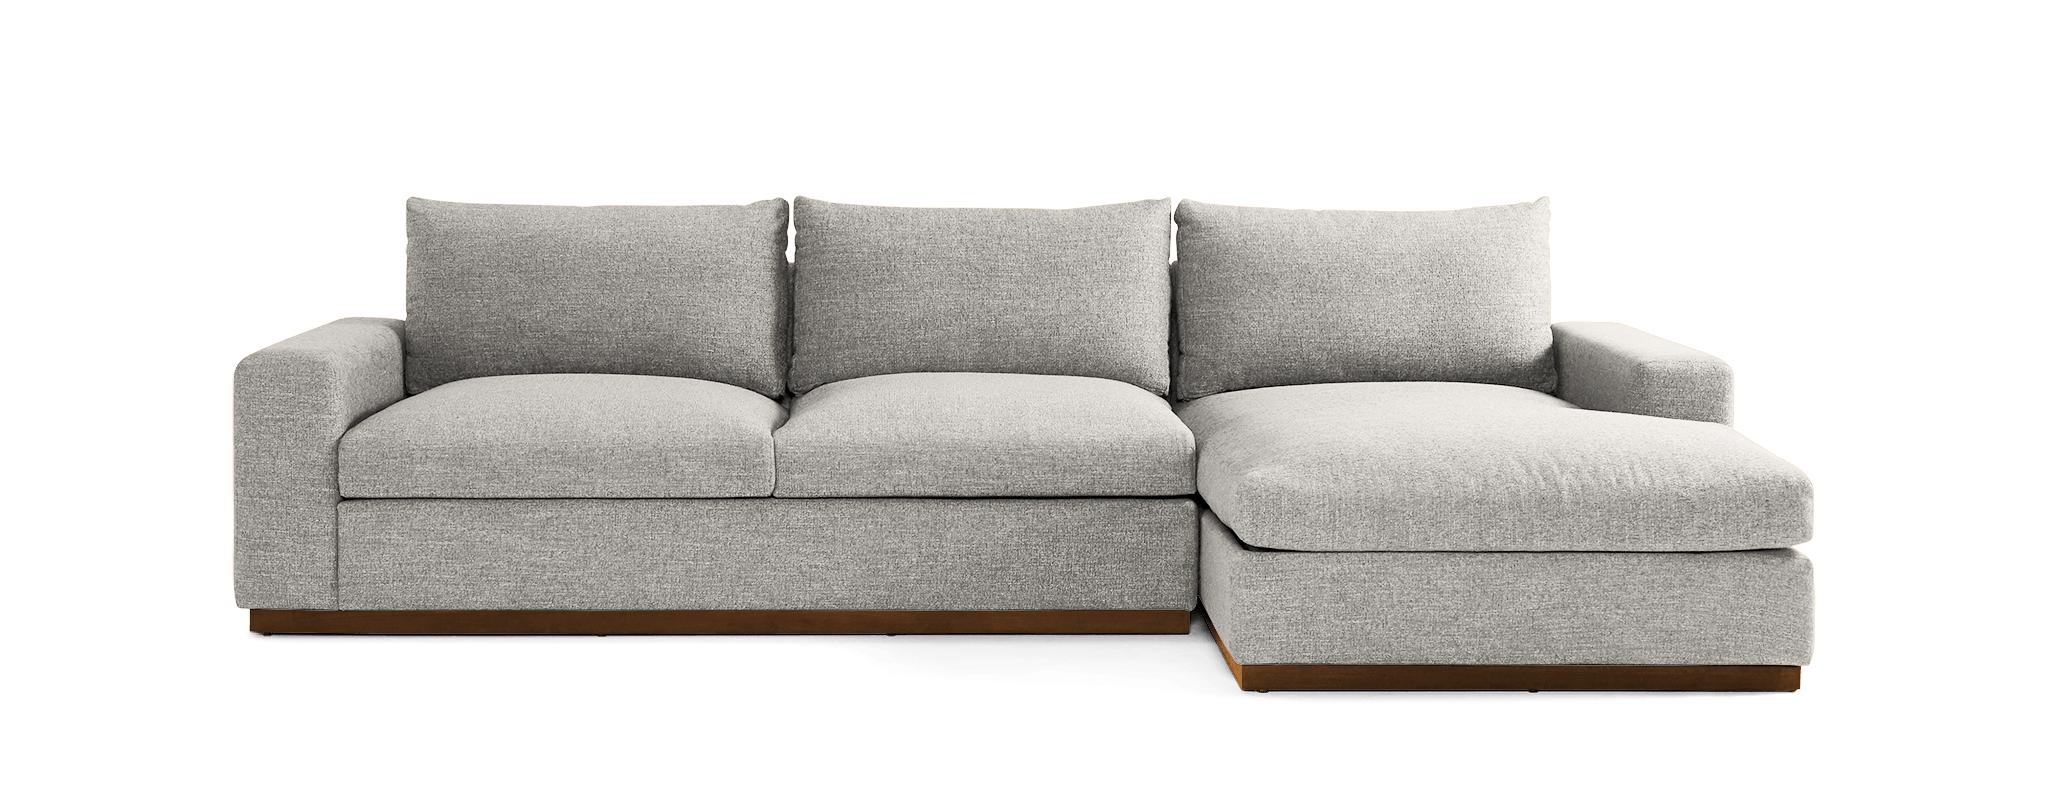 White Holt Mid Century Modern Sectional with Storage - Tussah Snow - Mocha - Left - Image 0